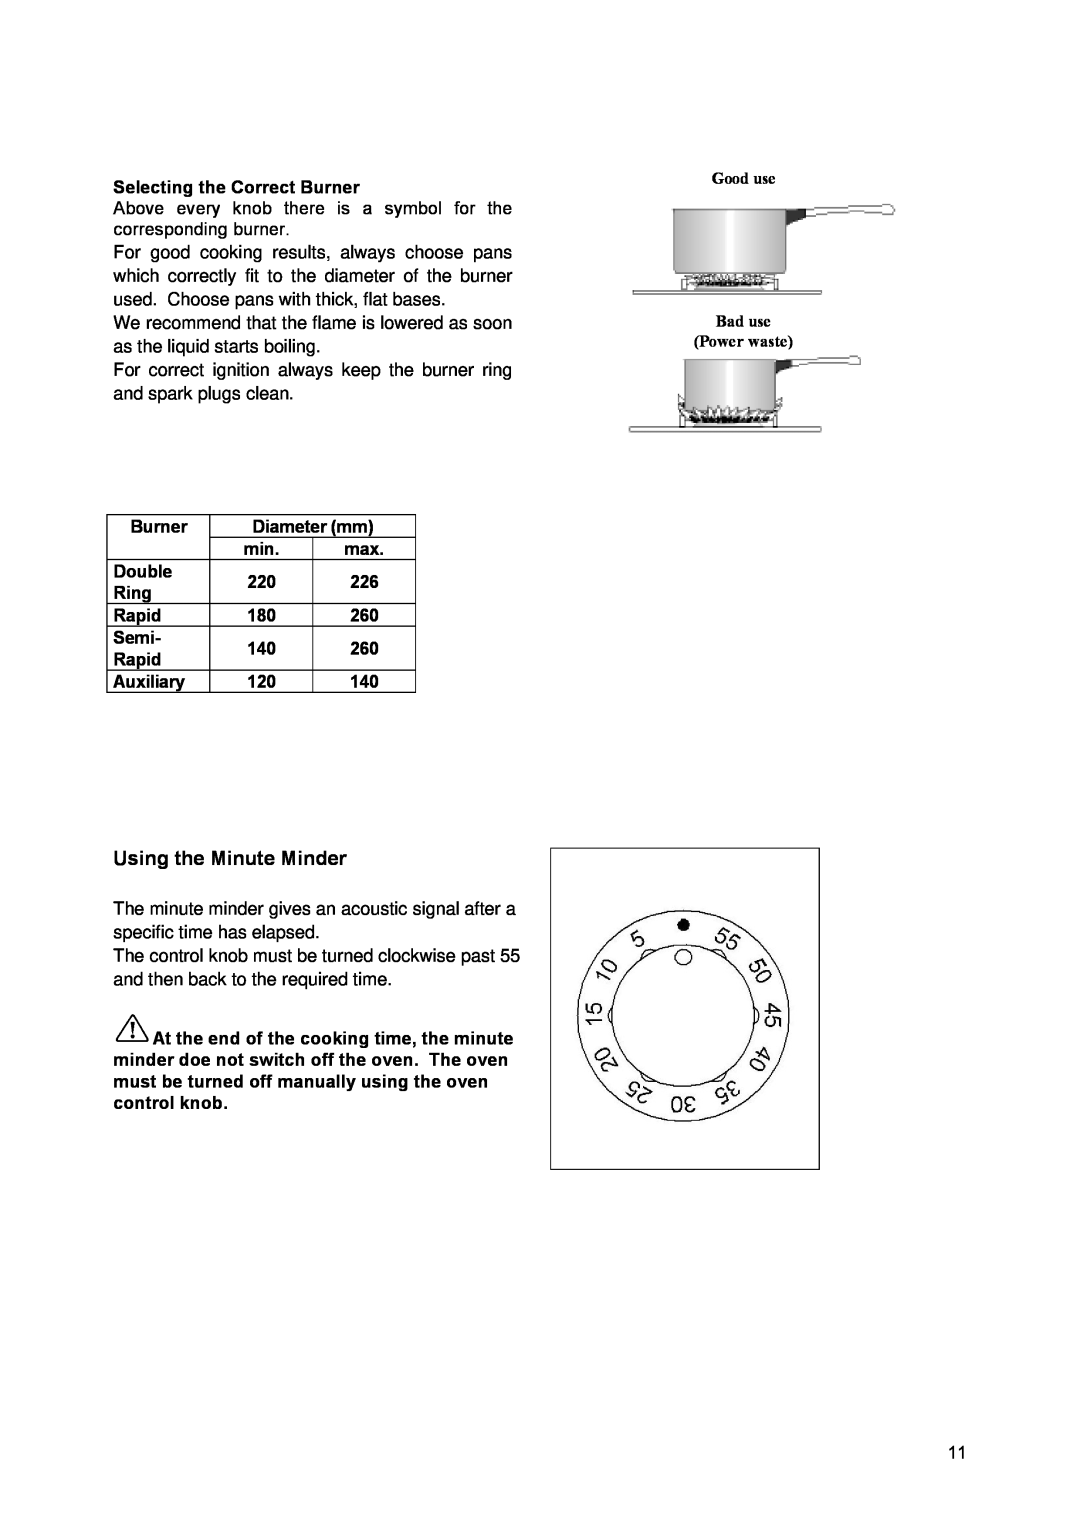 Zanussi ZCM900X manual Using the Minute Minder, Above every knob there is a symbol for the corresponding burner 